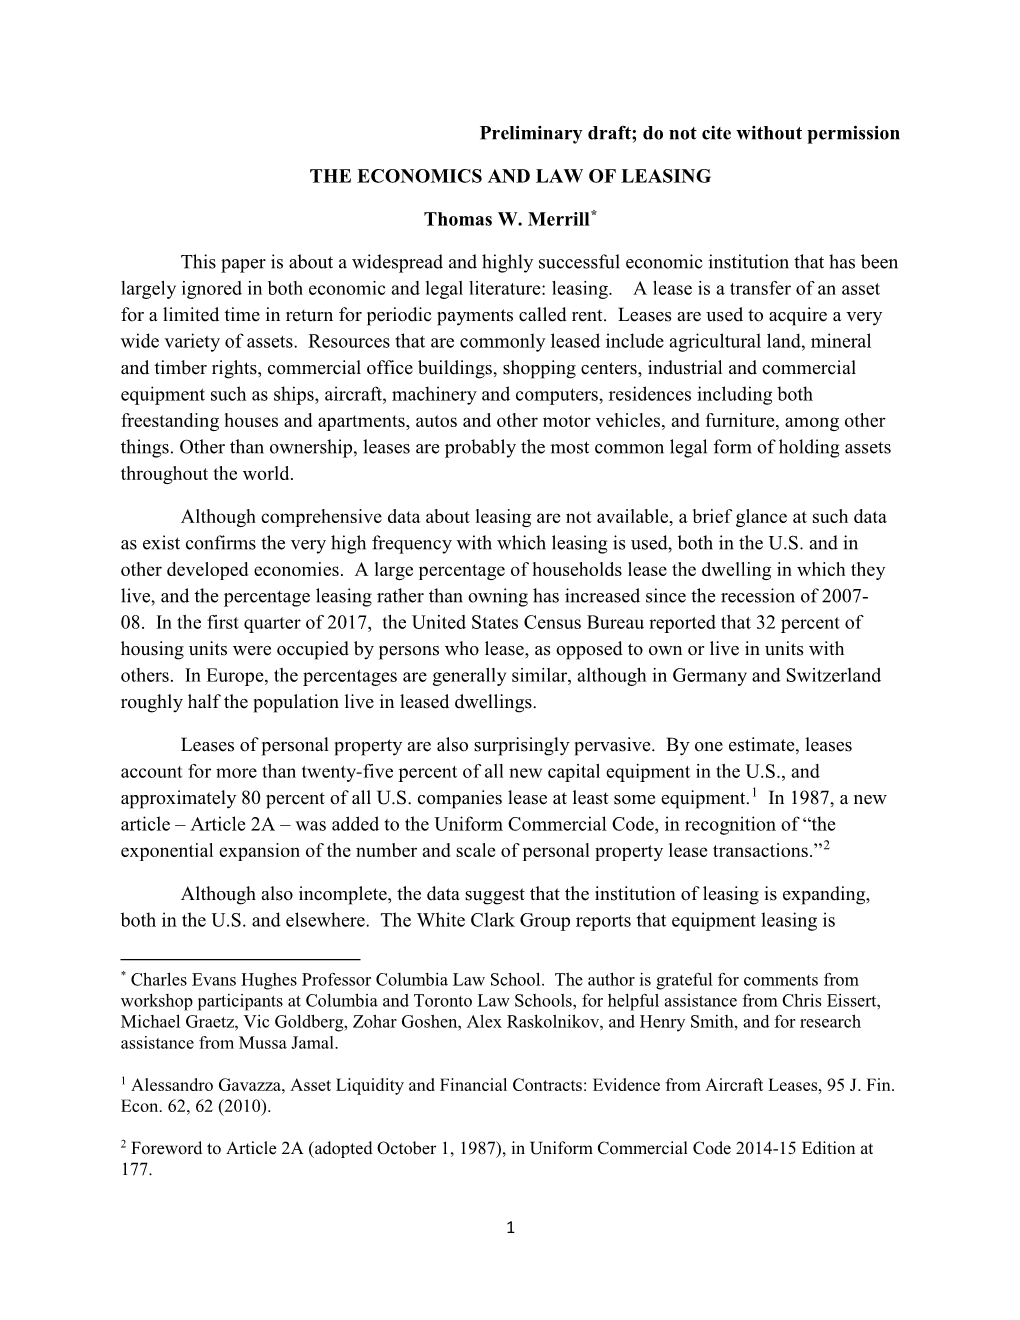 Law and Economics of Leases